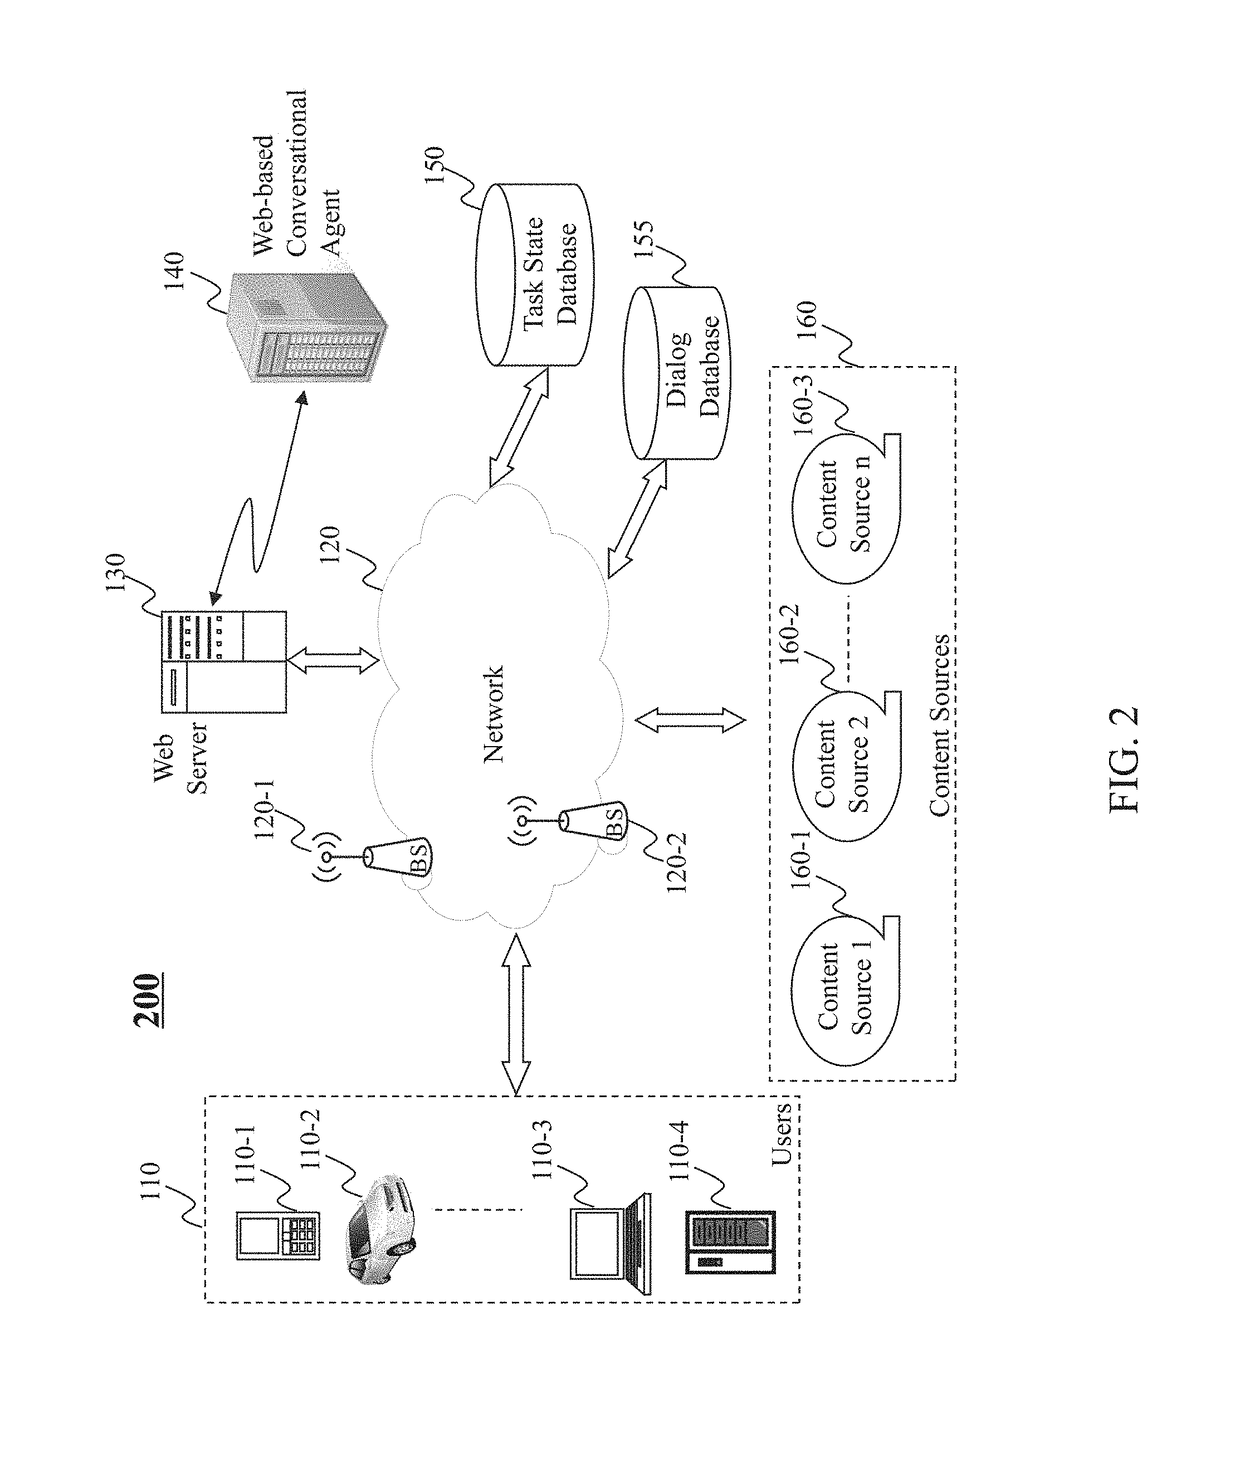 Method and system for facilitating a guided dialog between a user and a conversational agent